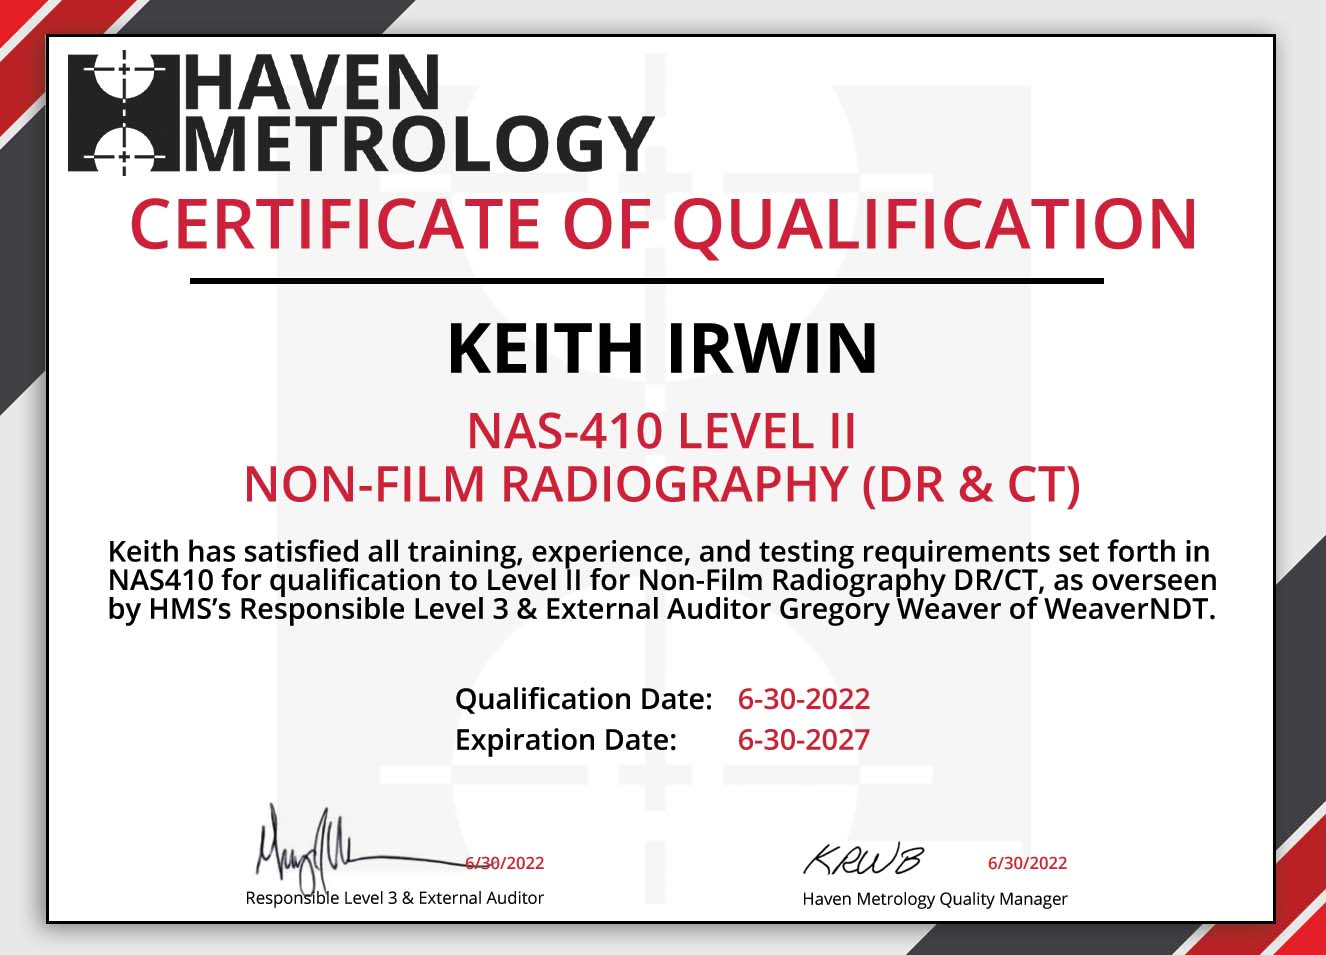 nas-410-rt-dr-ct-level-ii-qualification-keith-irwin-certificate